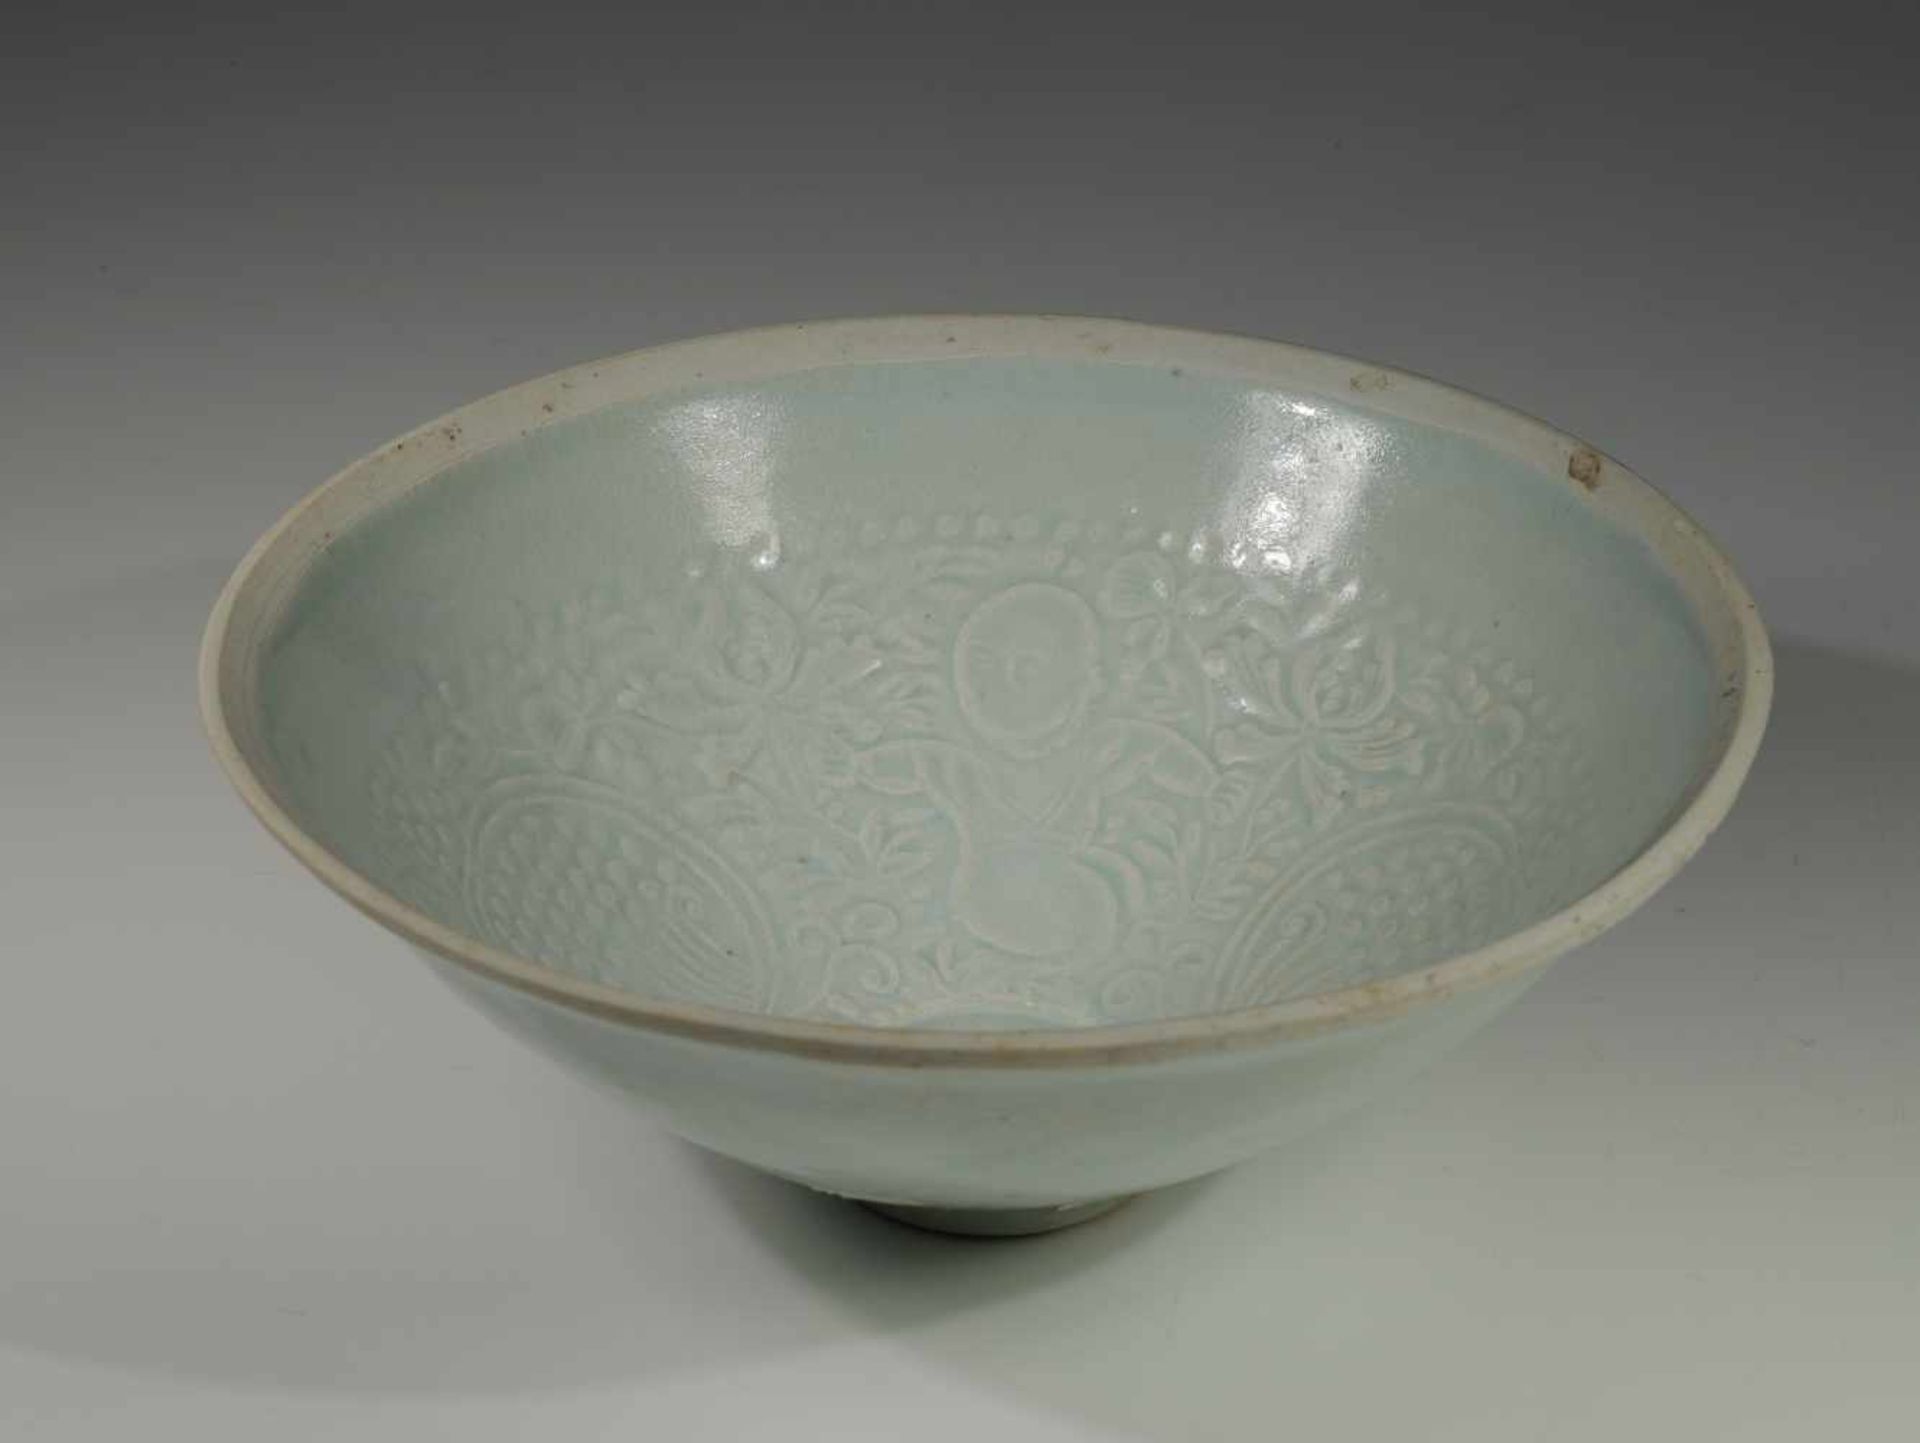 FINE AND RARE PORCLAIN BOWLBeige glazed, inside with floral motives, outside China, 12th - 13th